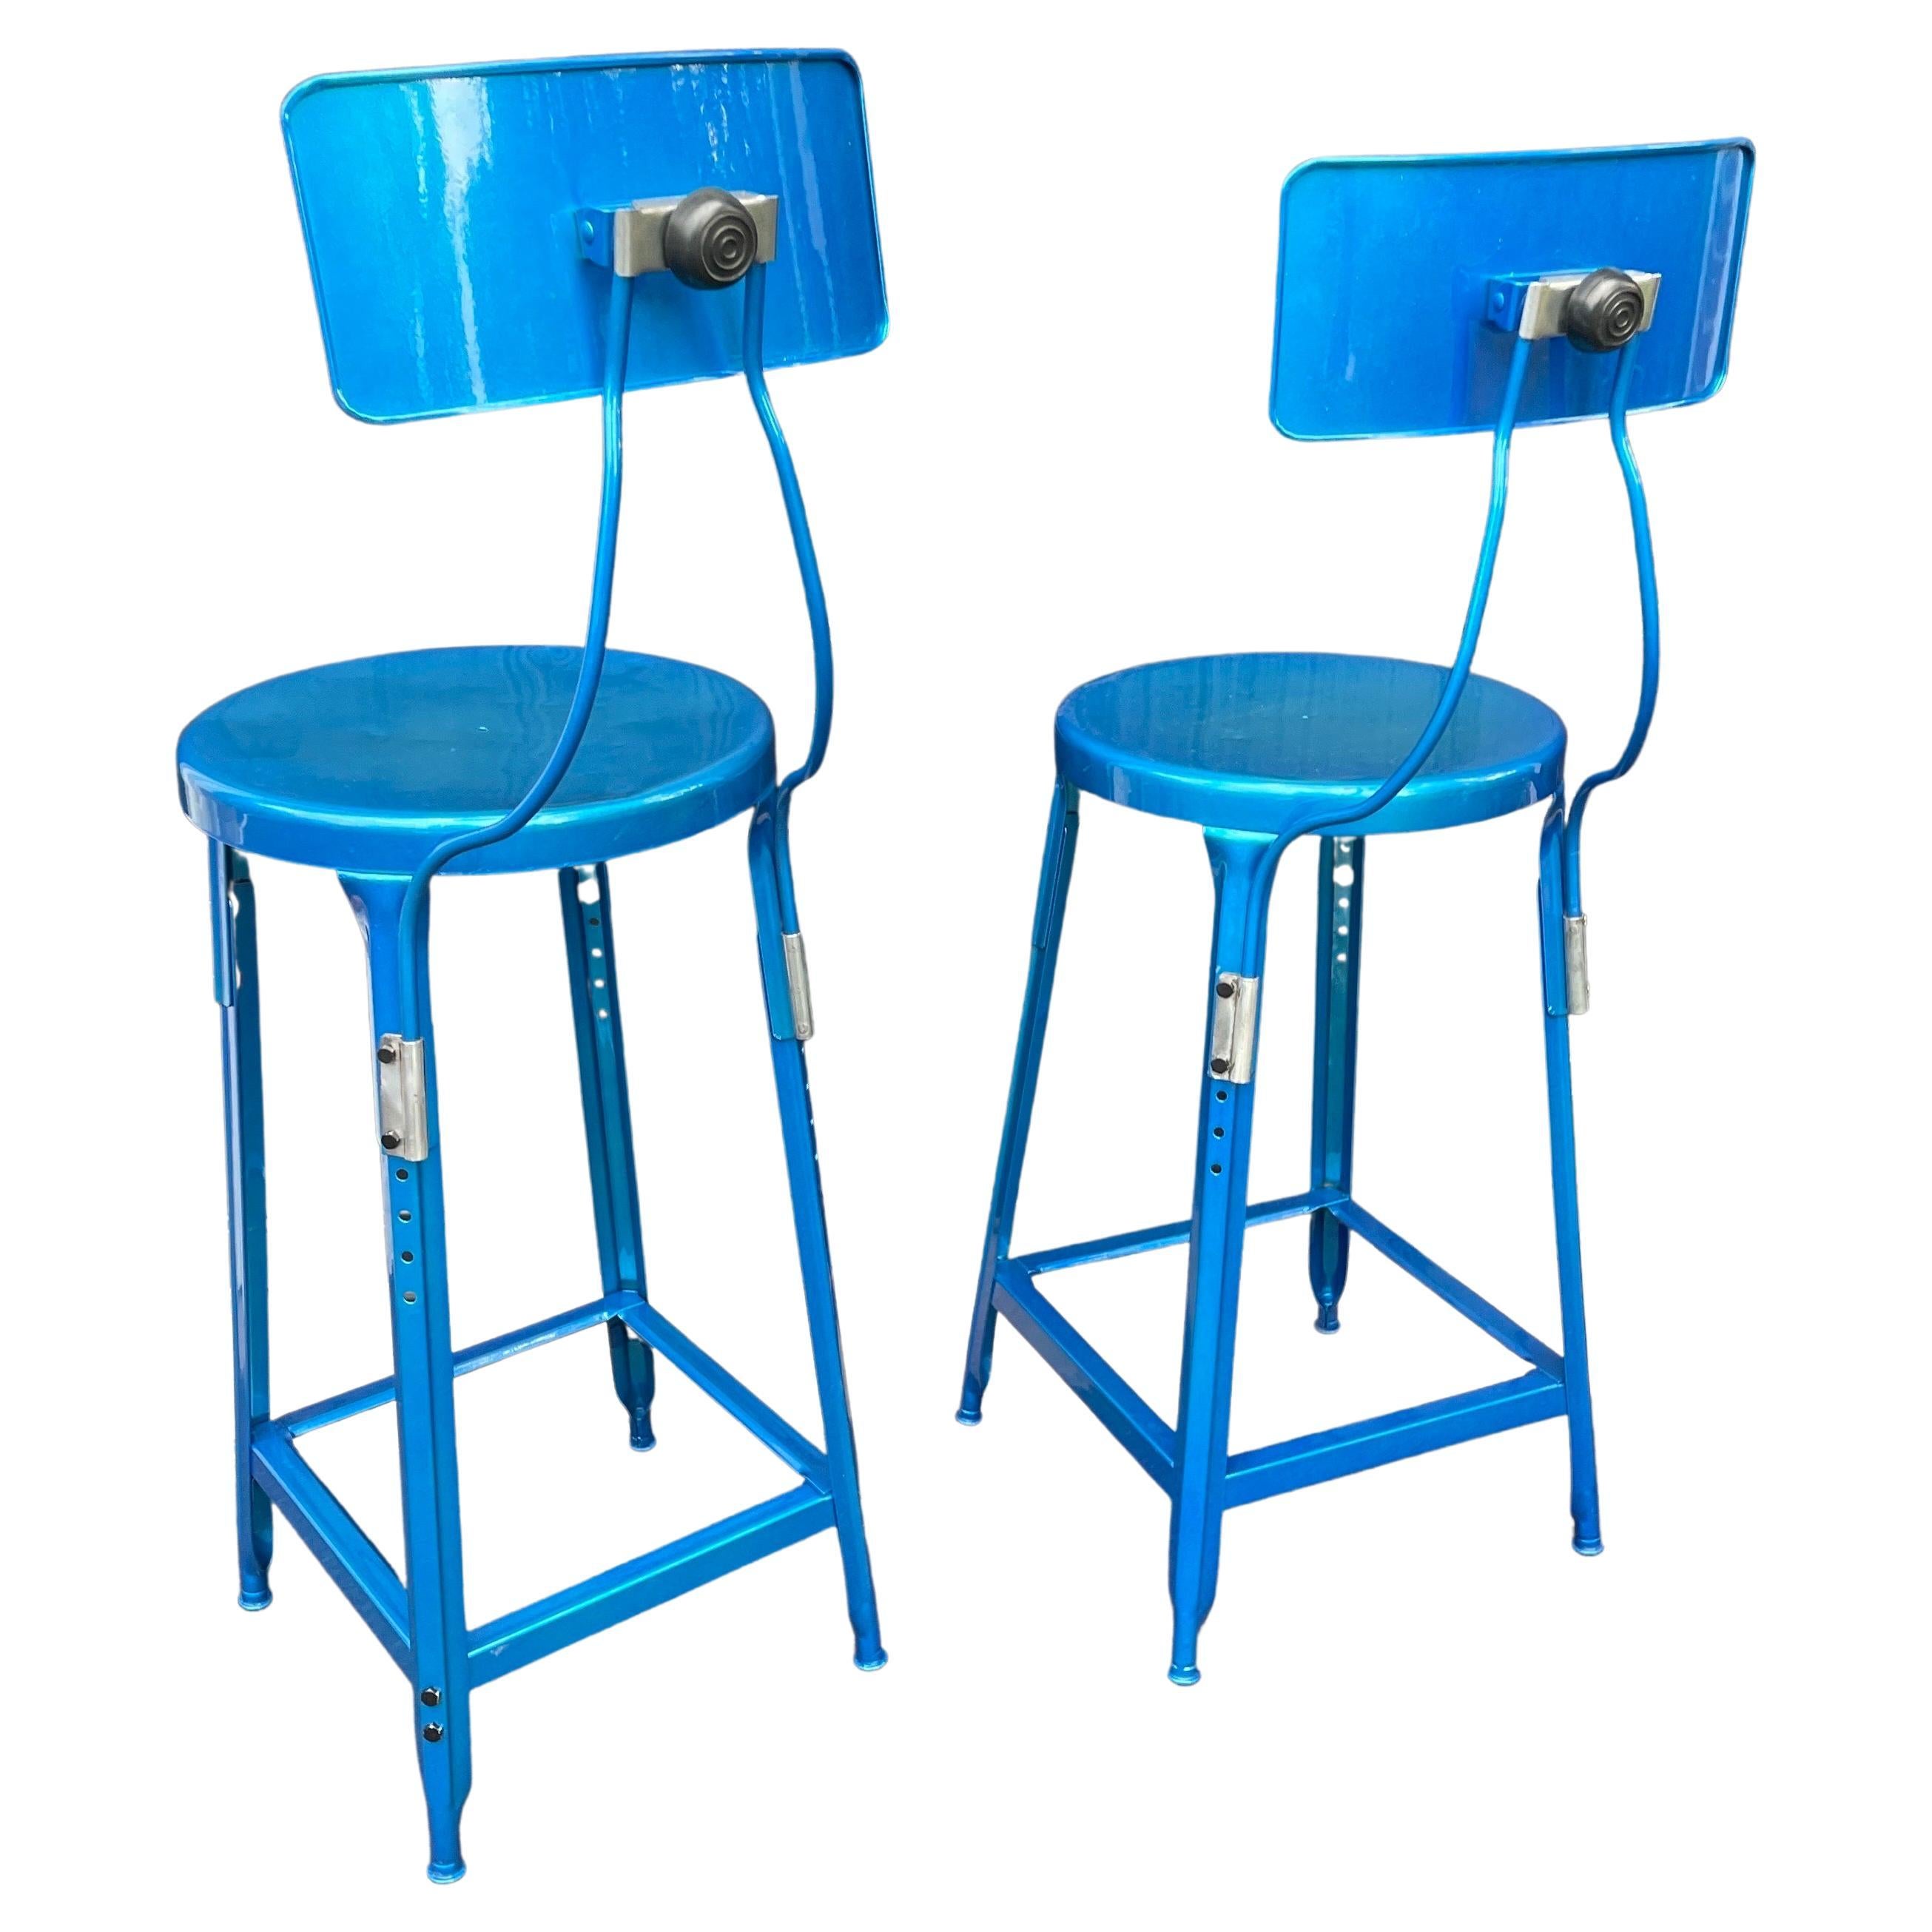 Set of Two Heavy Industrial Bar Stools in Powder Coated Blue In Good Condition For Sale In Haddonfield, NJ